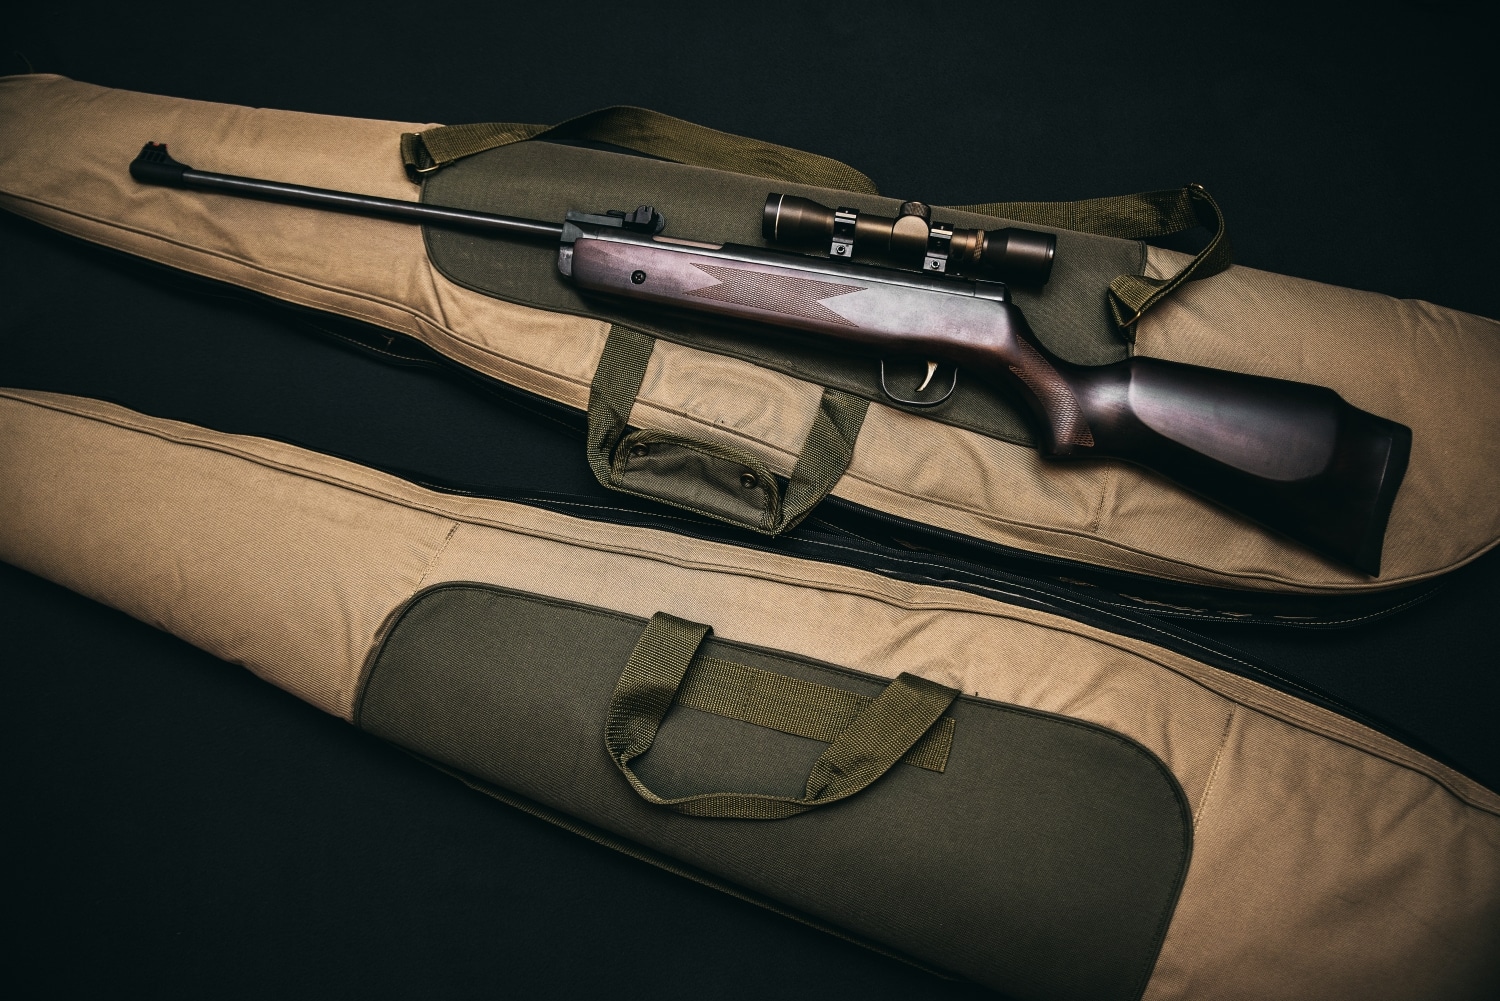 Rifle resting on top of a gun case